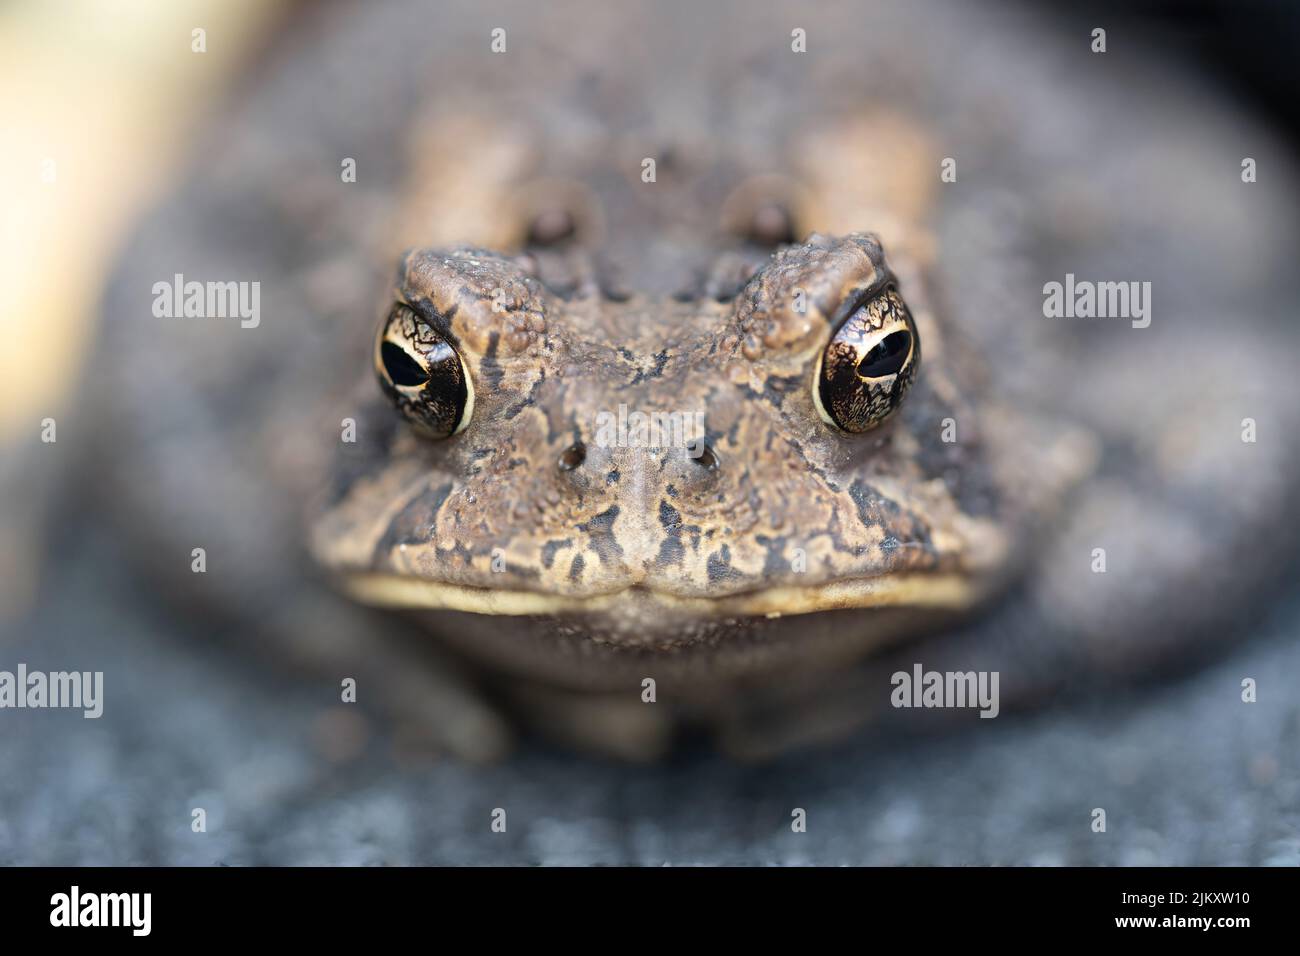 A common American toad with large glossy black eyes stares menacingly at the camera. Stock Photo